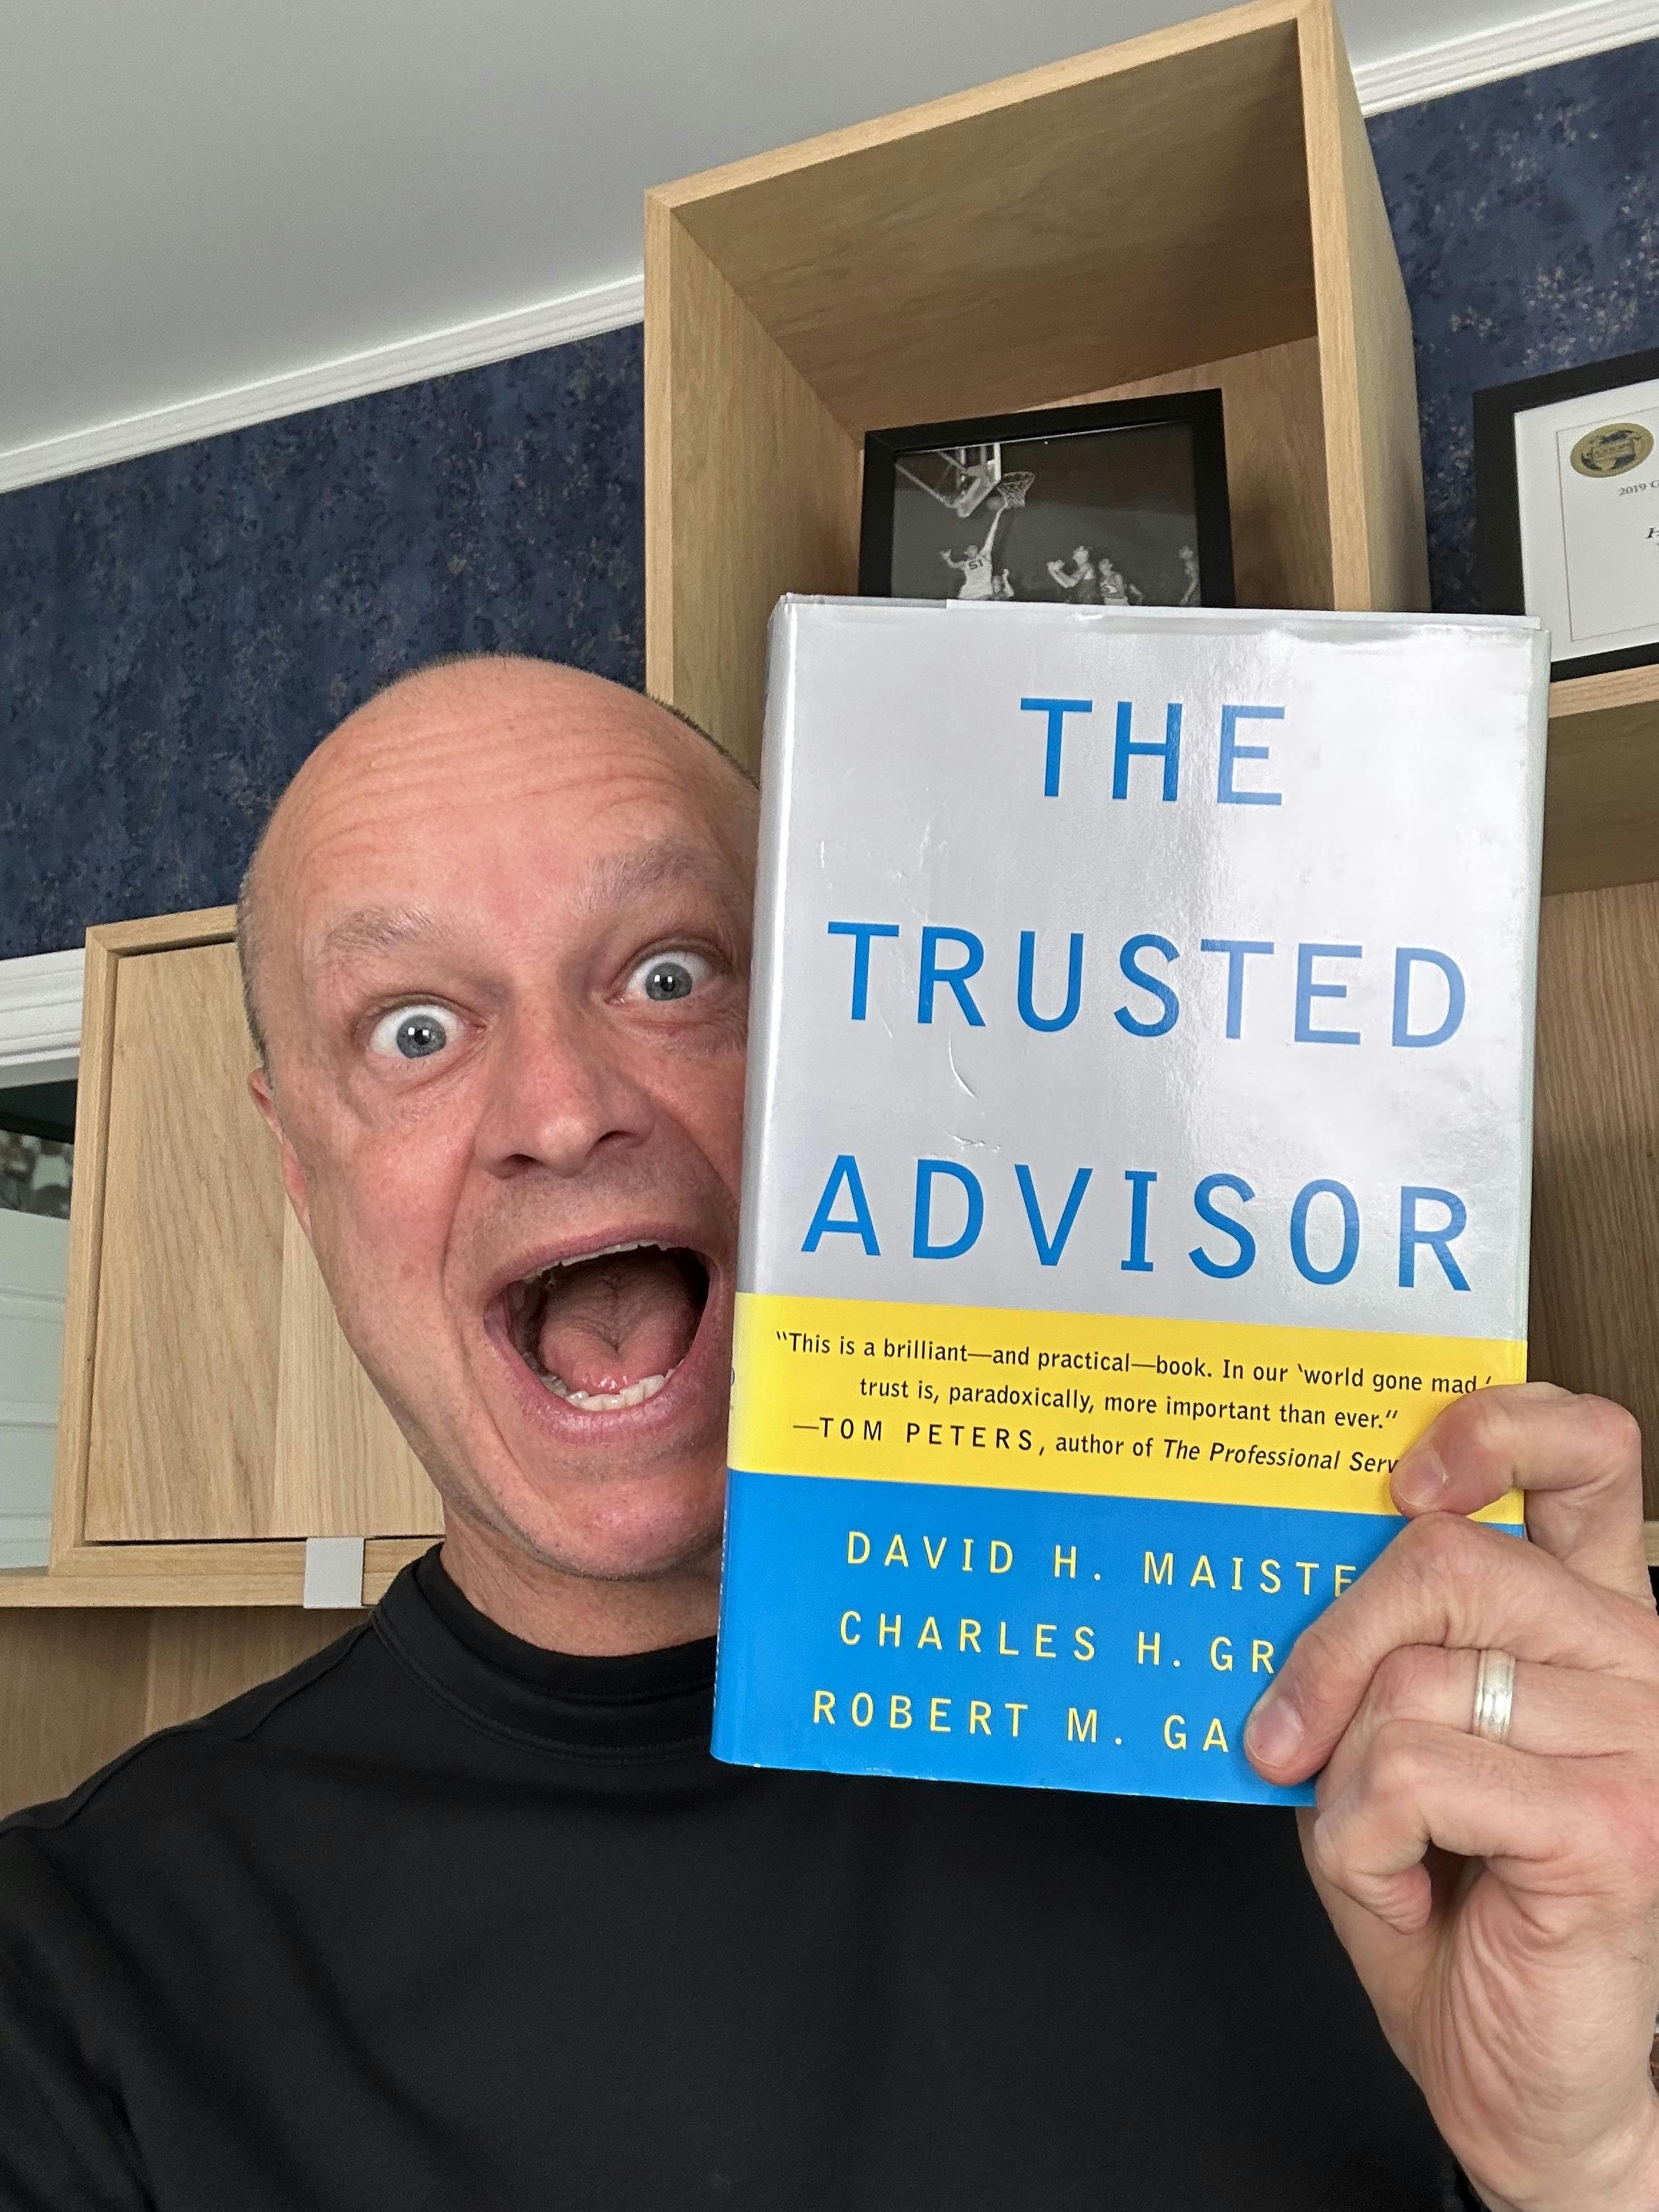 A picture of Mo holding coauthor Charlie Green's book The Trusted Advisor